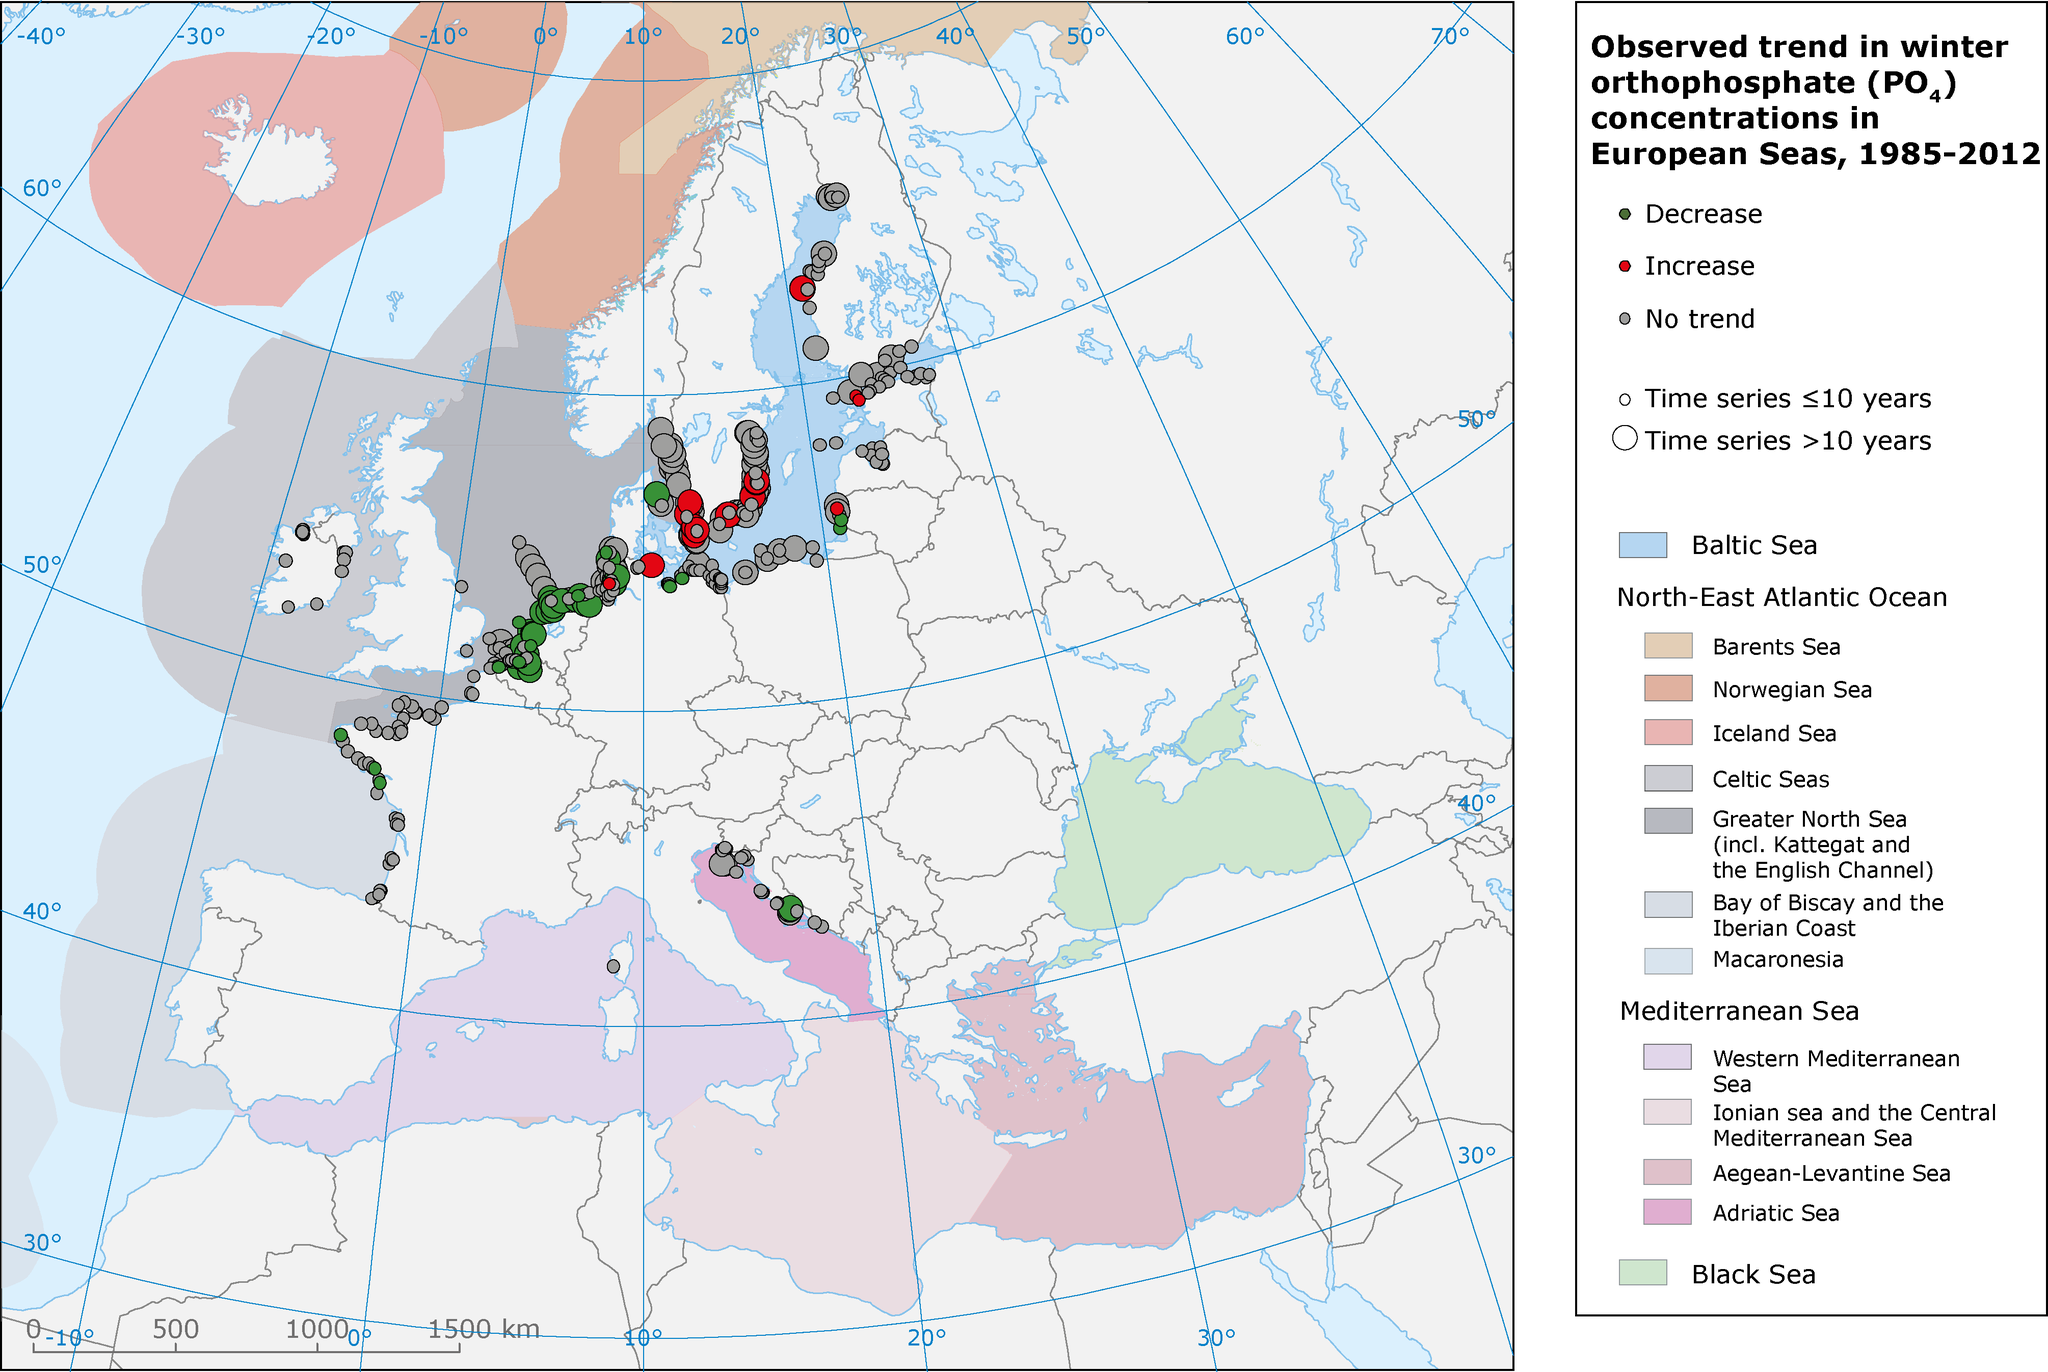 Trends per station in orthophosphate concentrations in European seas